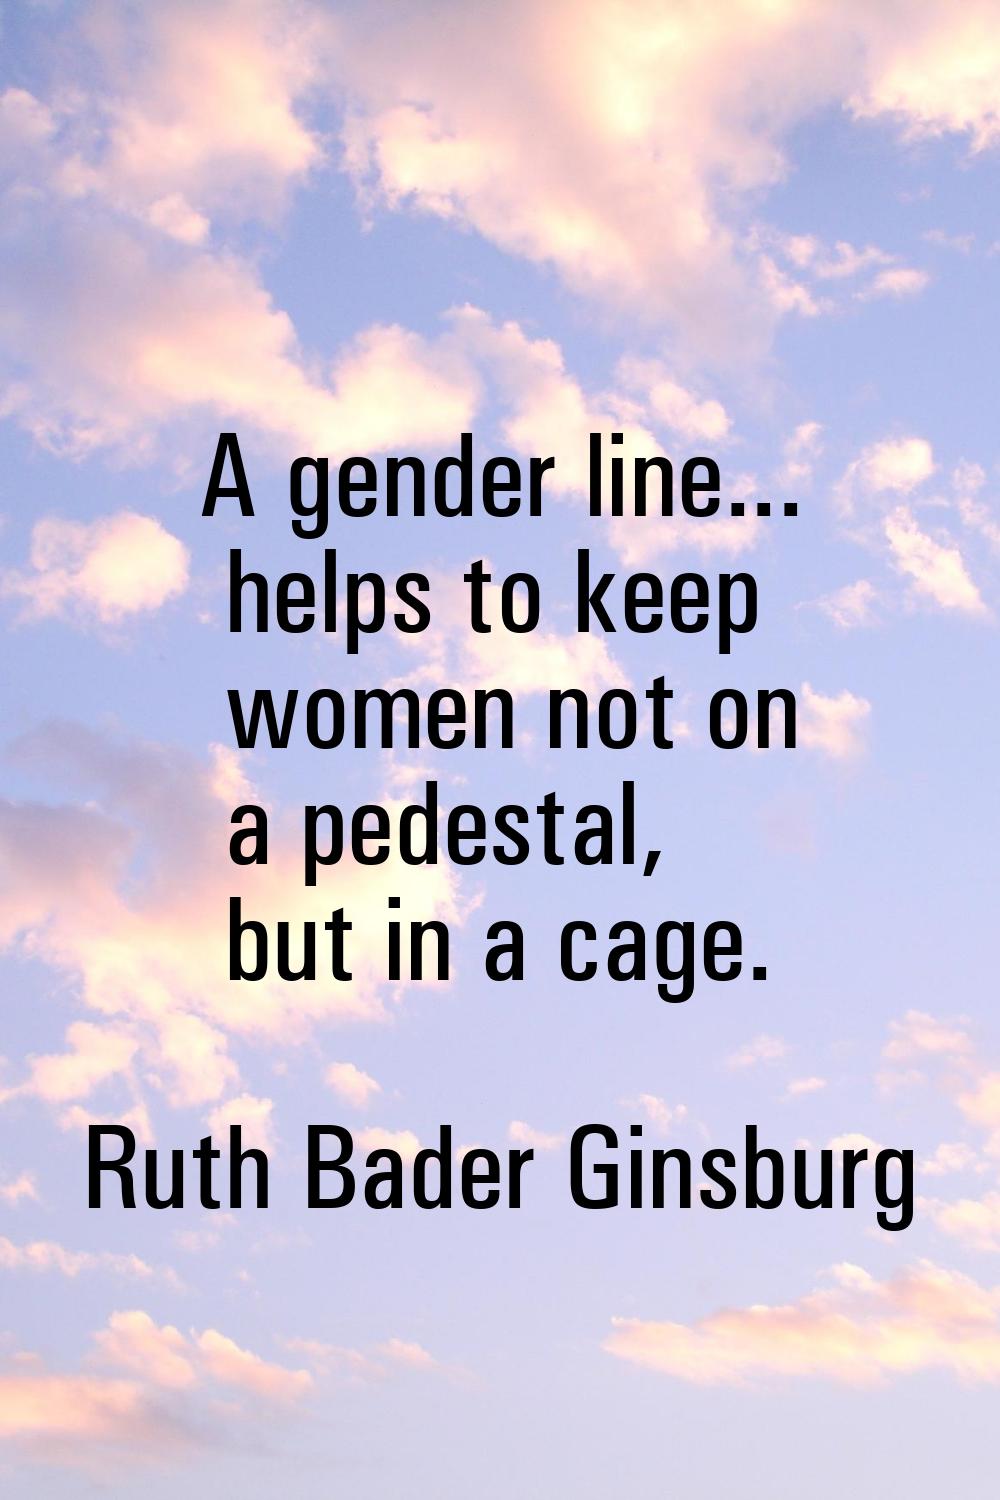 A gender line... helps to keep women not on a pedestal, but in a cage.